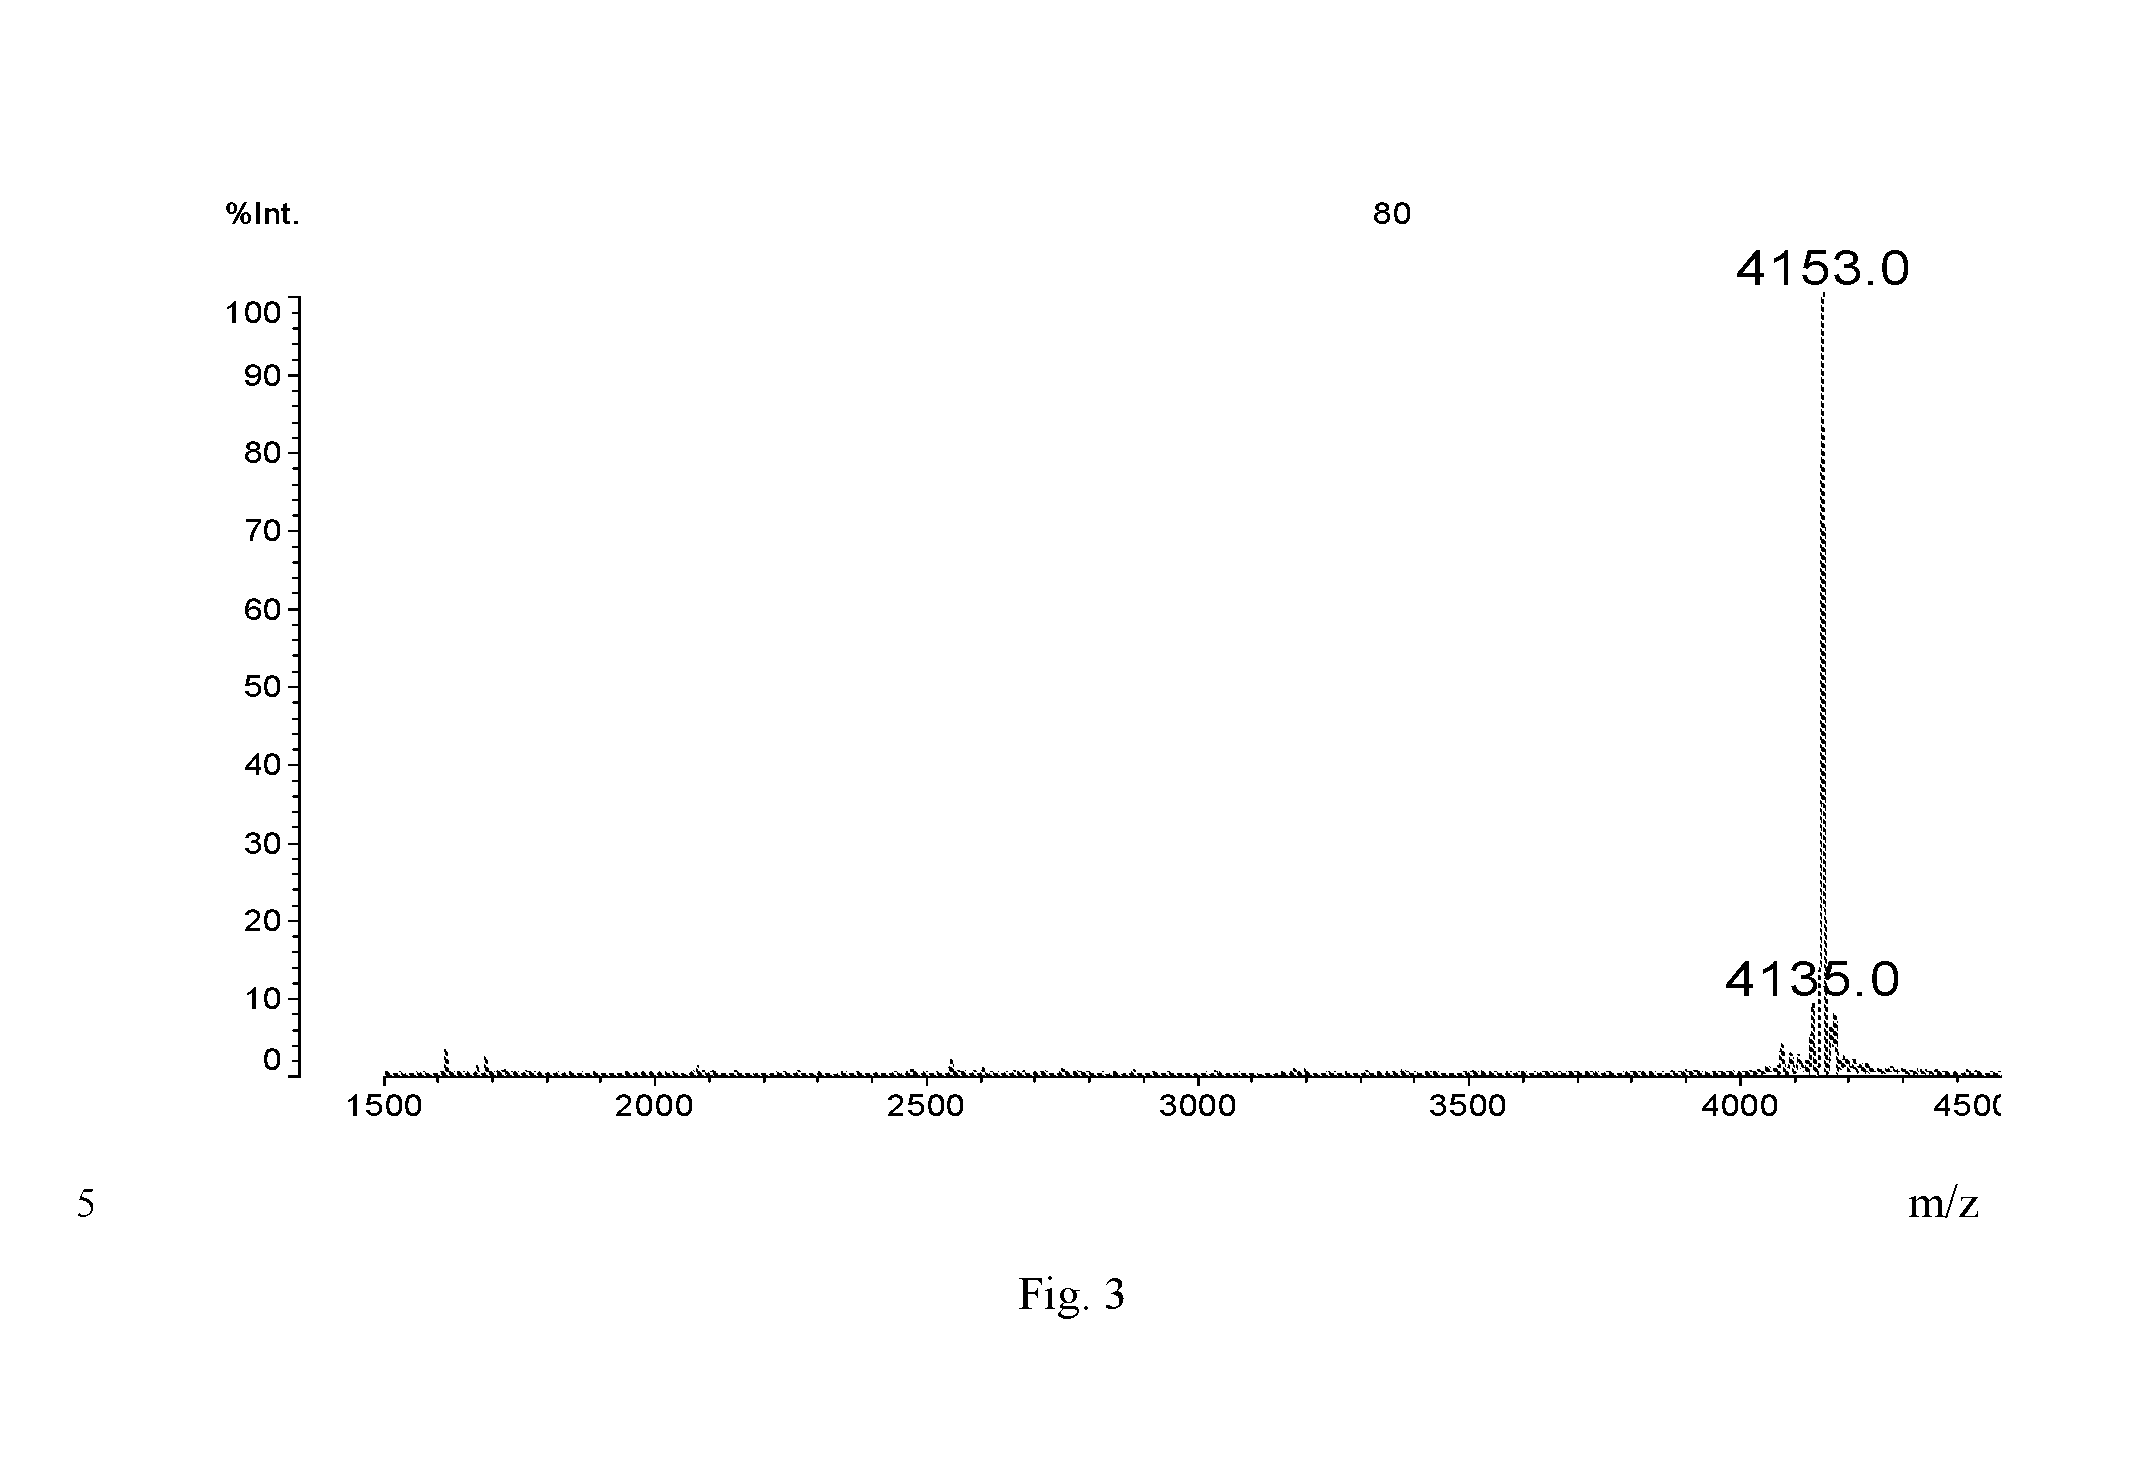 Glucagon-like peptide-1 analogues and uses thereof